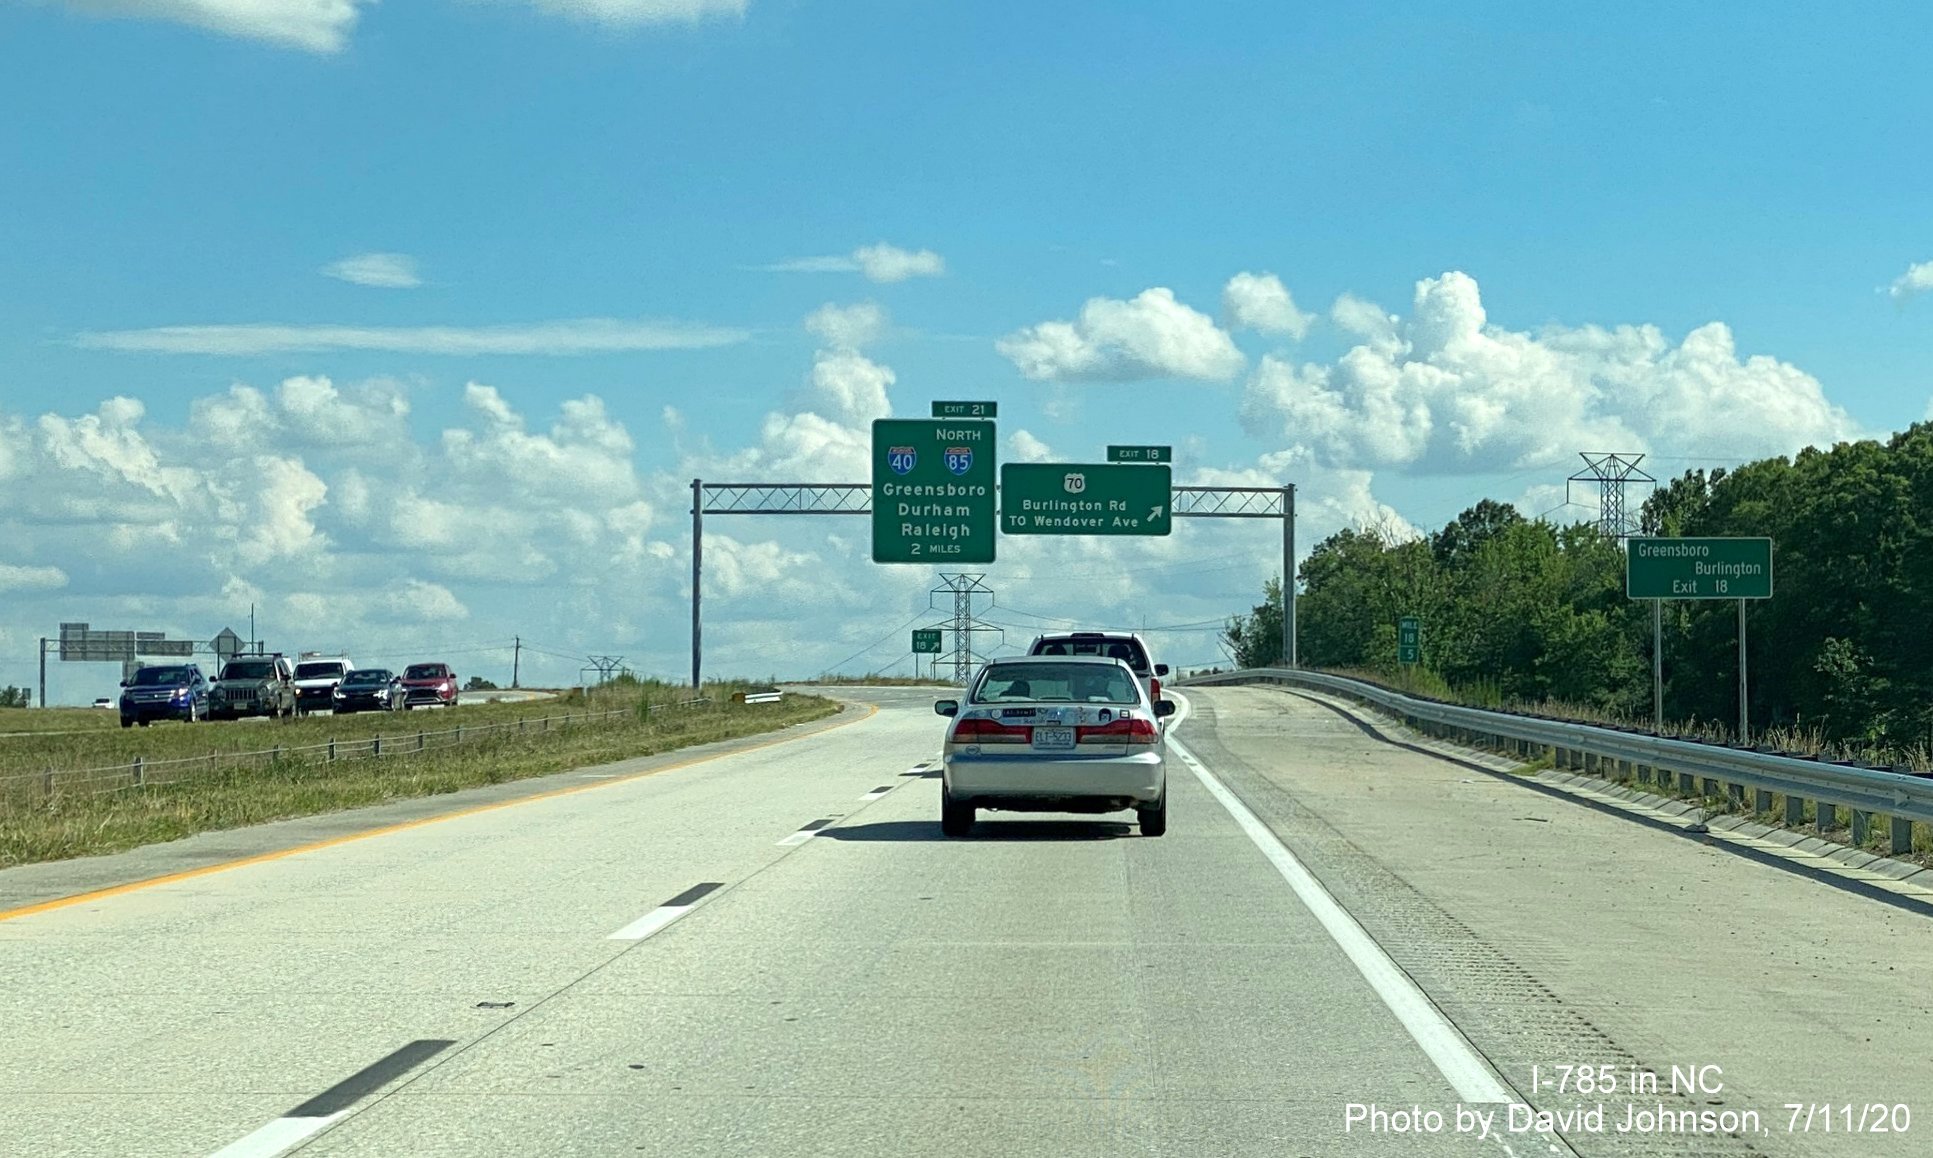 Image of overhead signage at US 70 exit on I-785 South Greensboro Urban Loop with small ground mounted Burlington auxiliary sign, by David Johnson July 2020